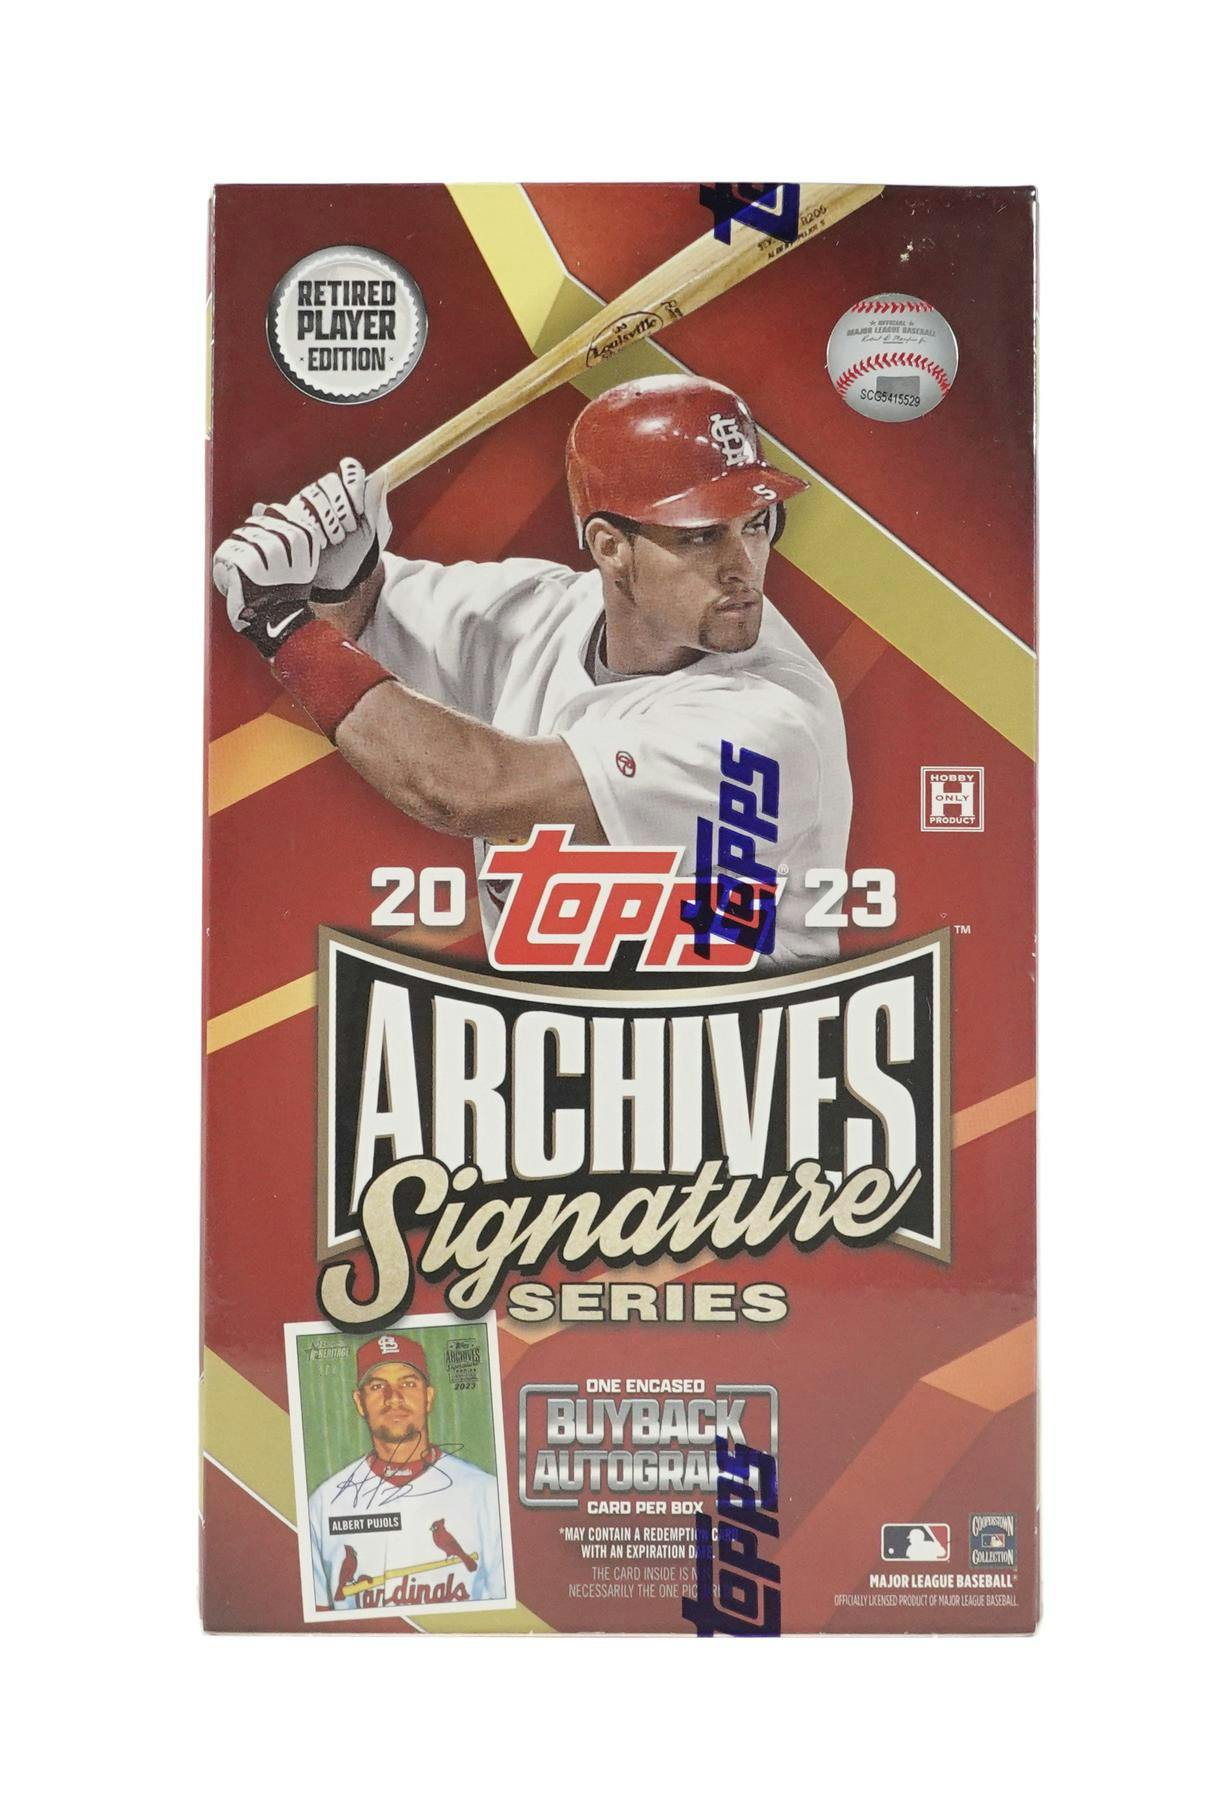 Albert Pujols Rookie Card Checklist and Signature Guide